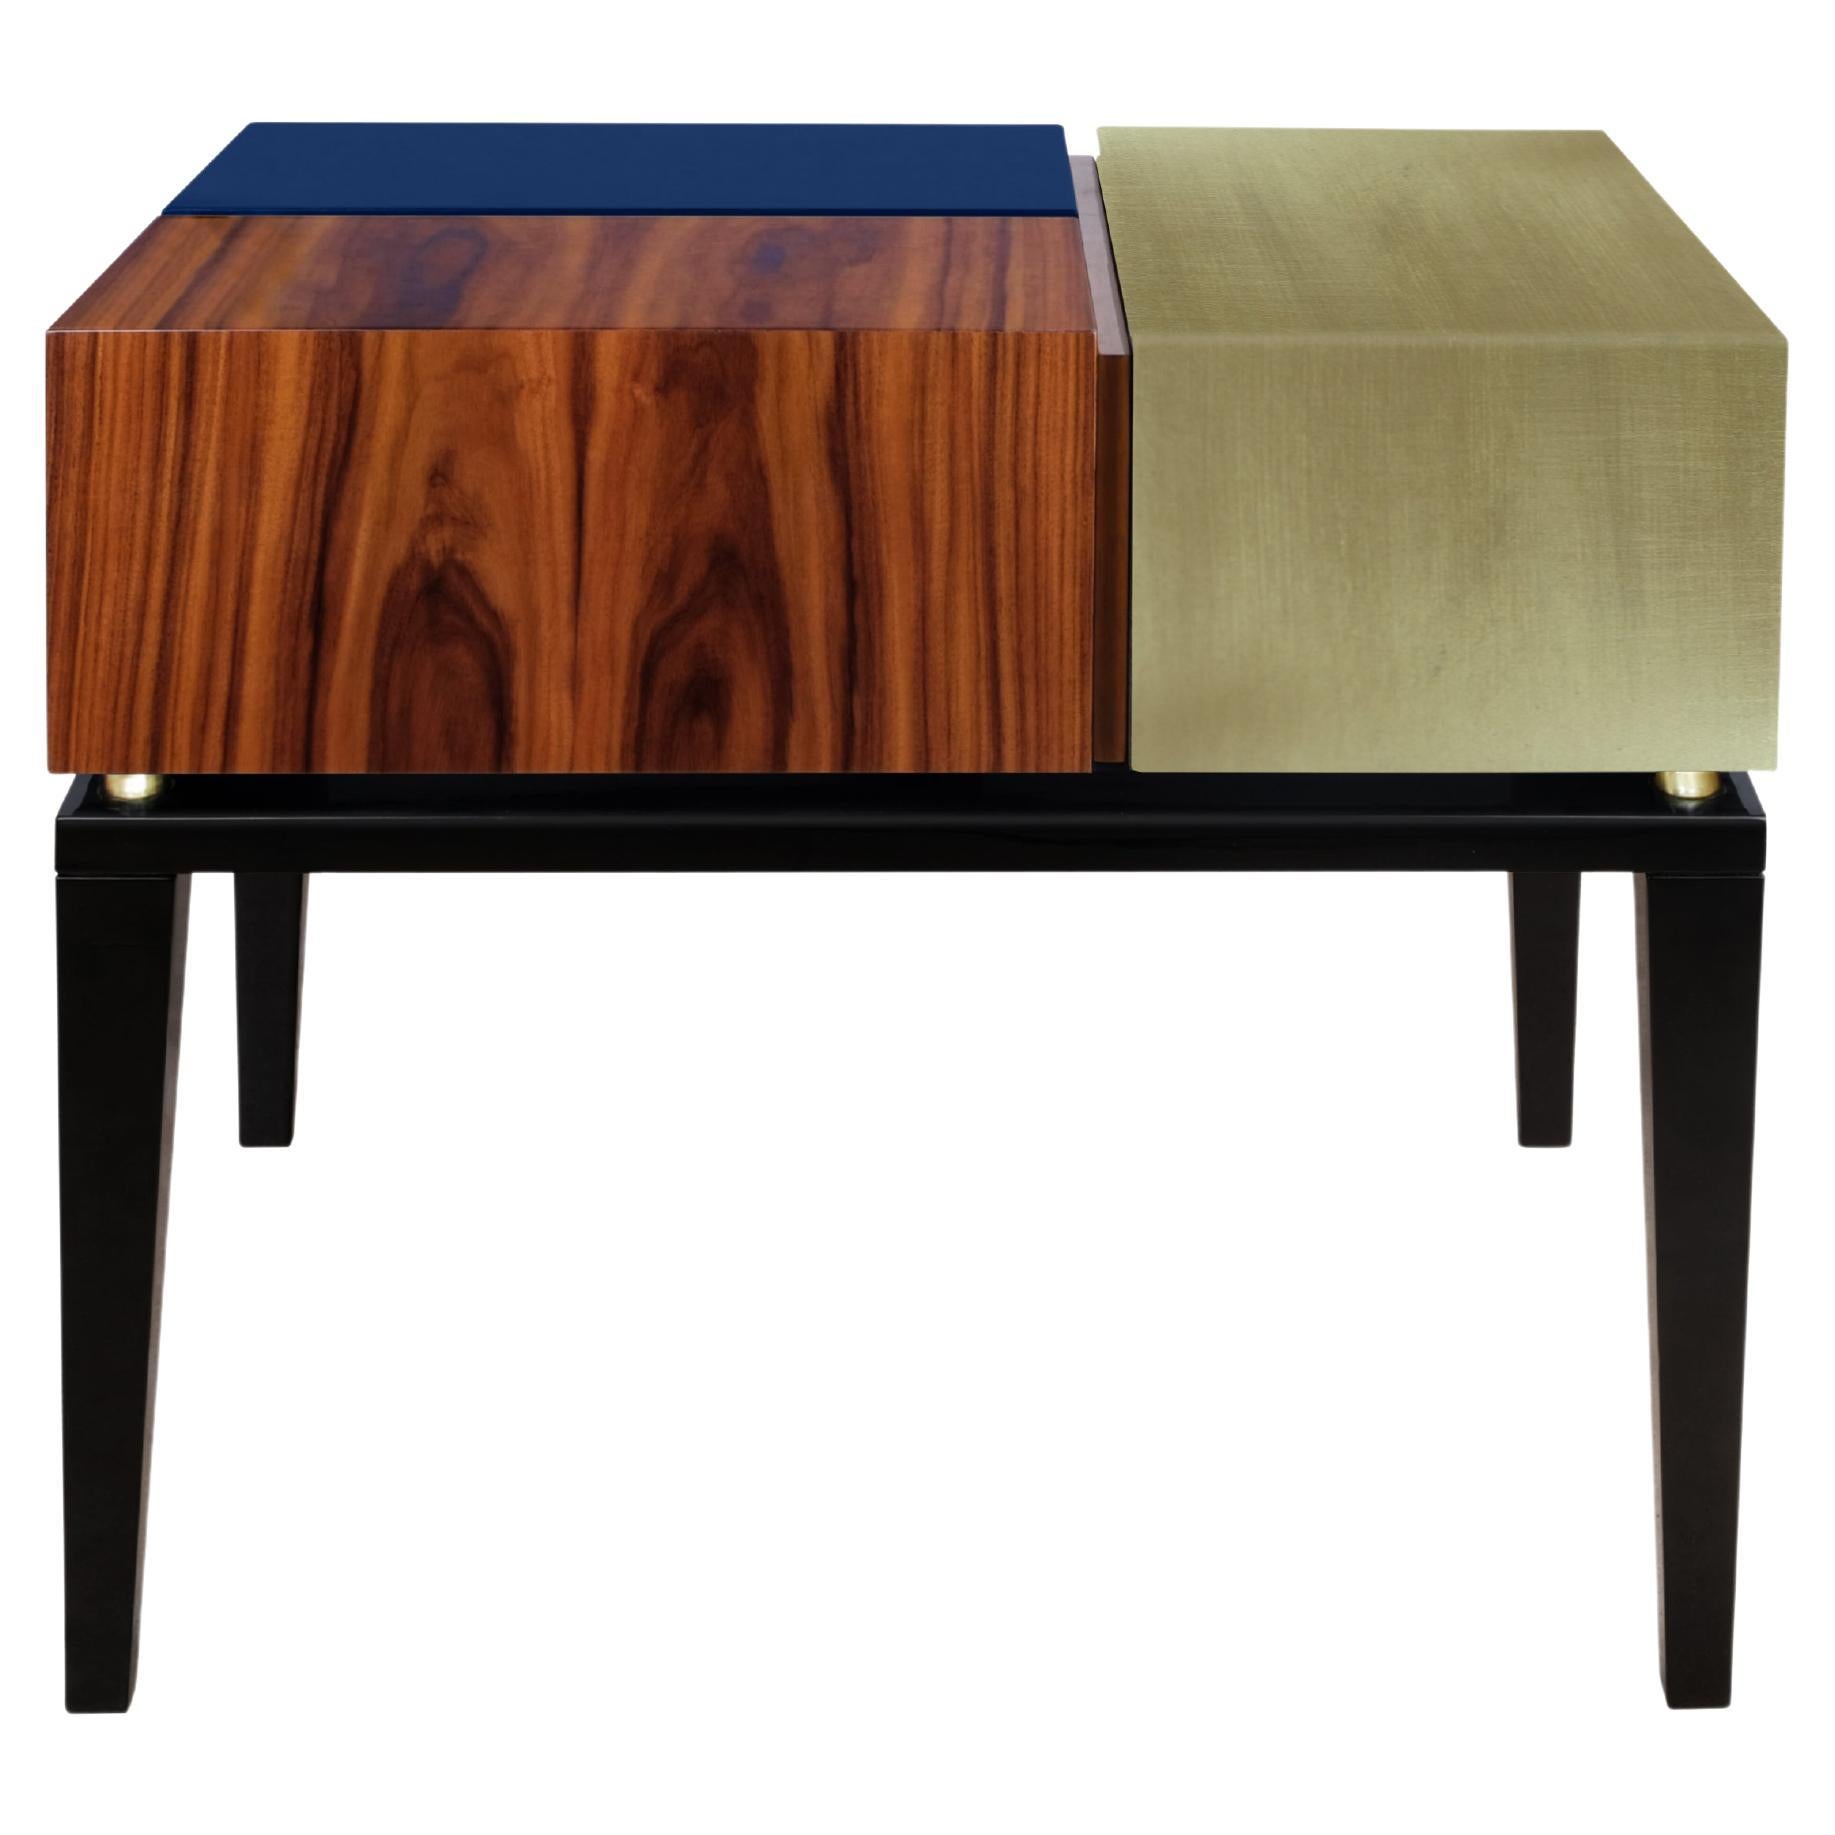 21st Proportion Bedside Table Lacquered Wood Gold Leaf by Malabar